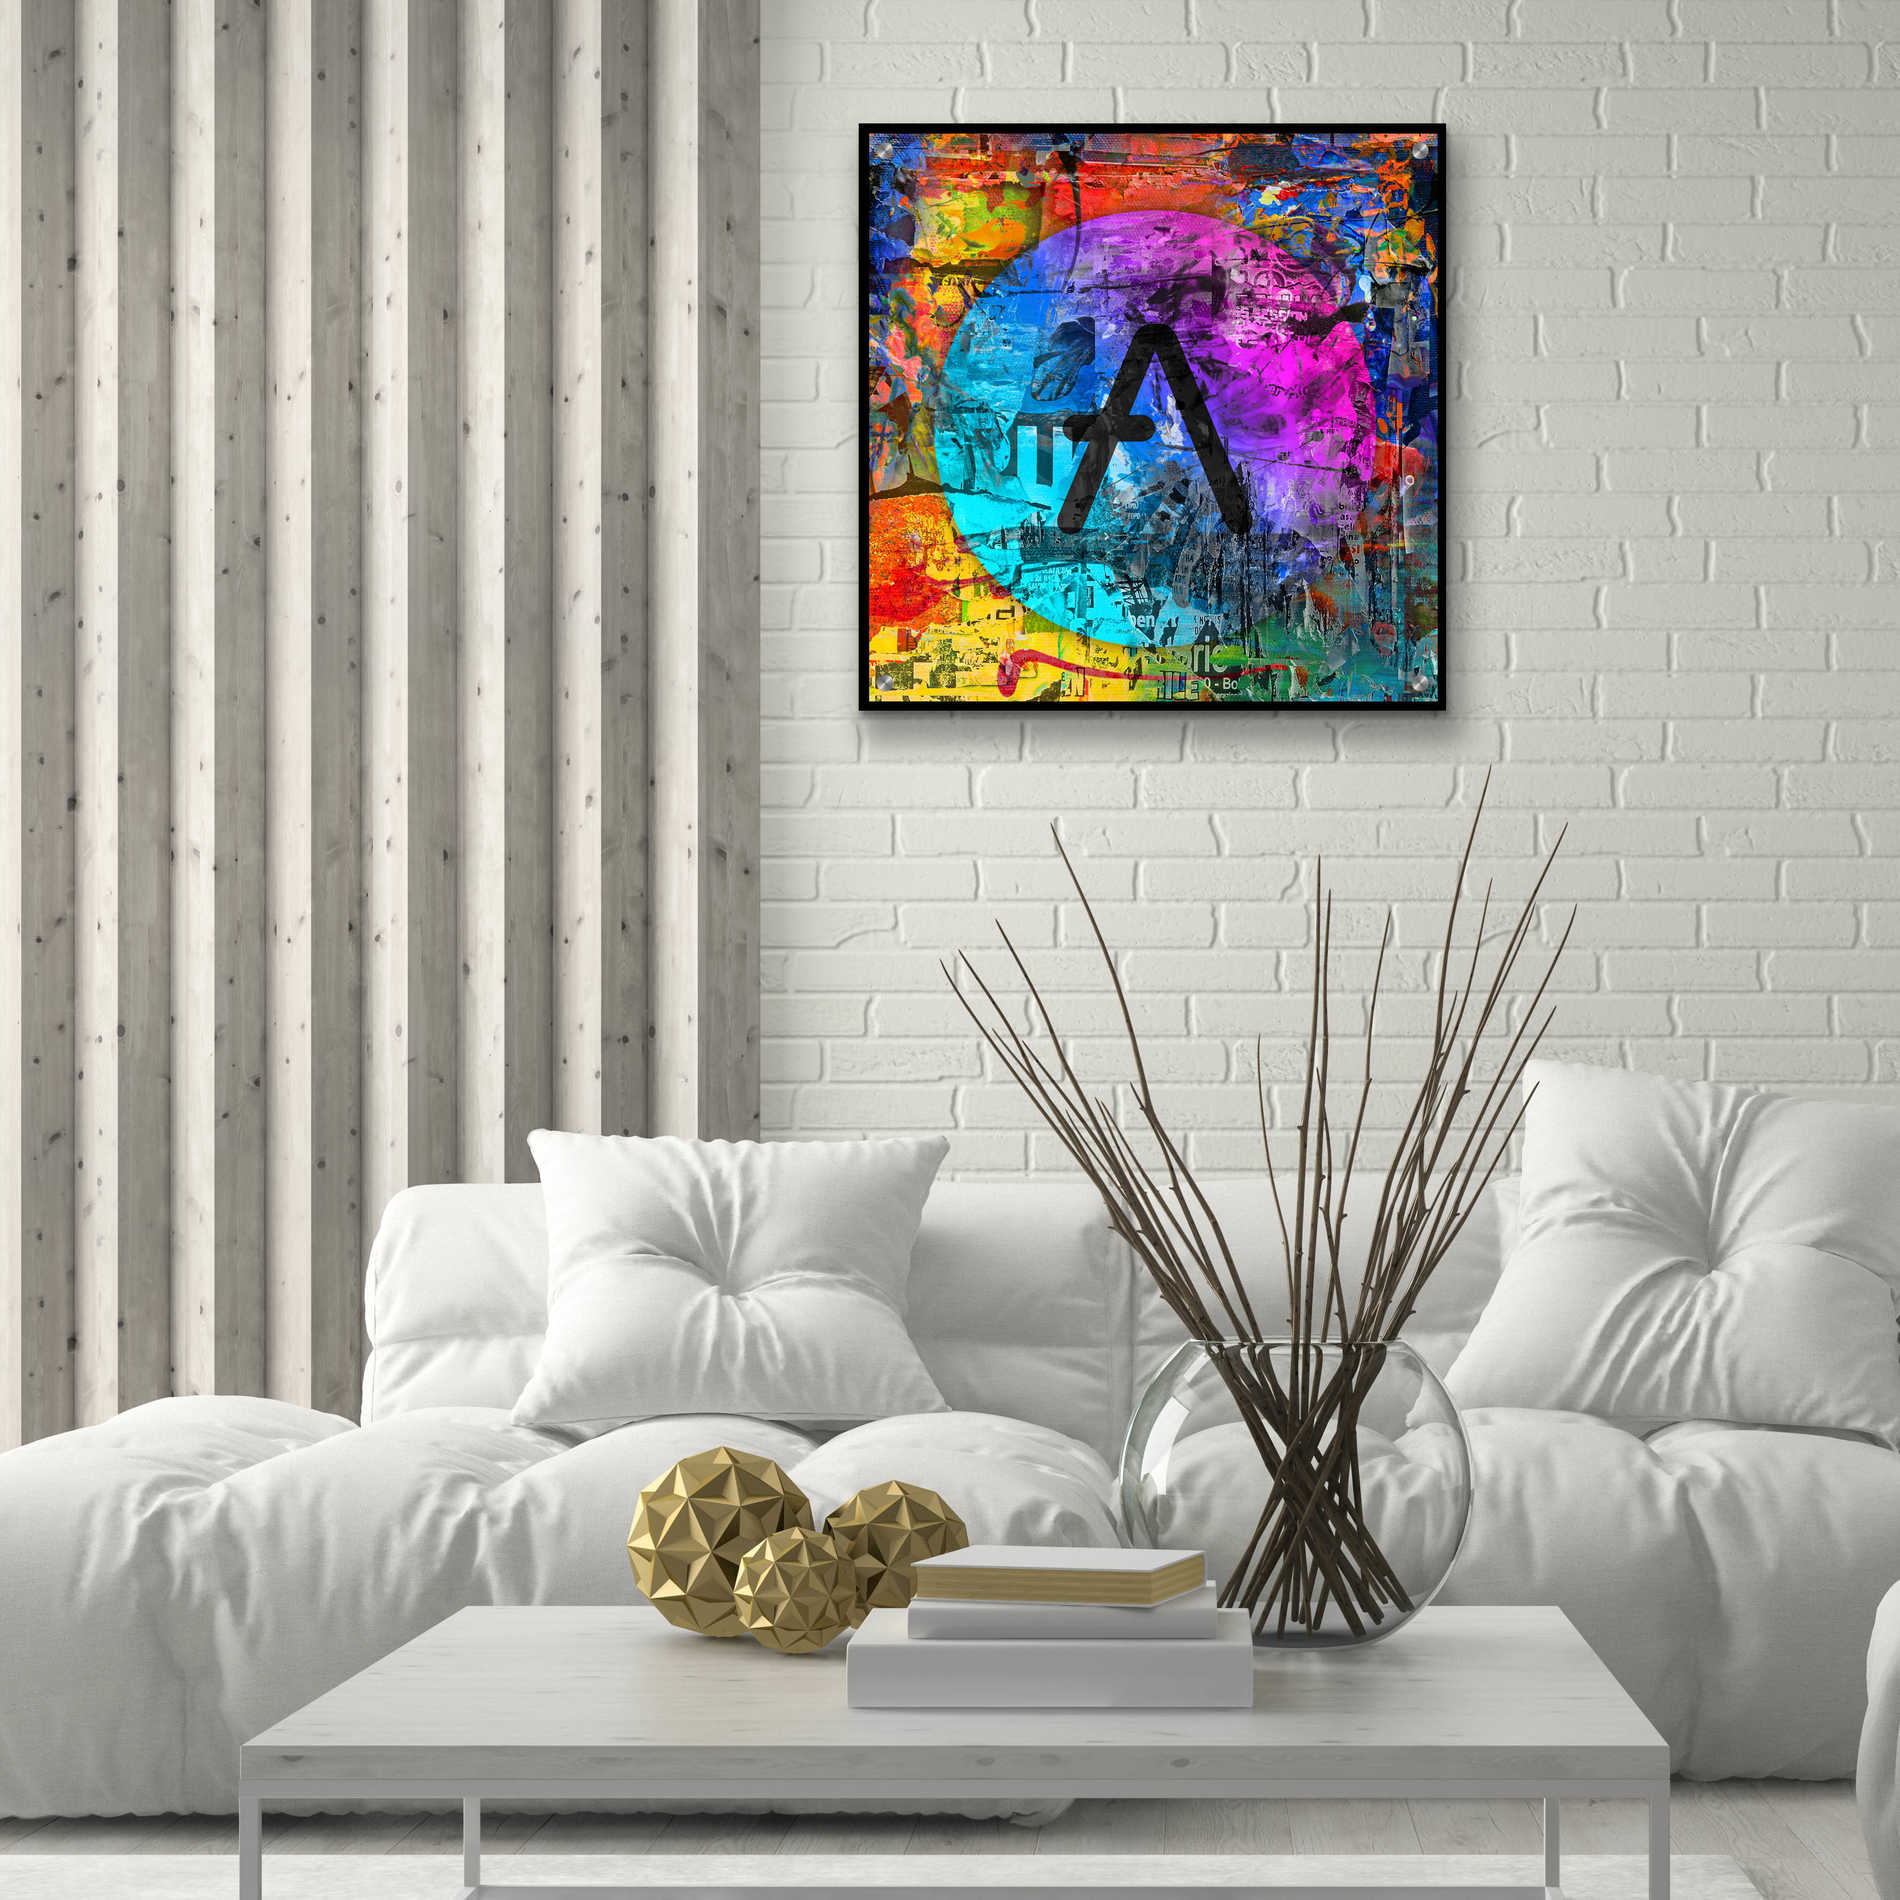 Epic Art 'Aave Crypto In Color' by Epic Art Portfolio, Acrylic Glass Wall Art,24x24